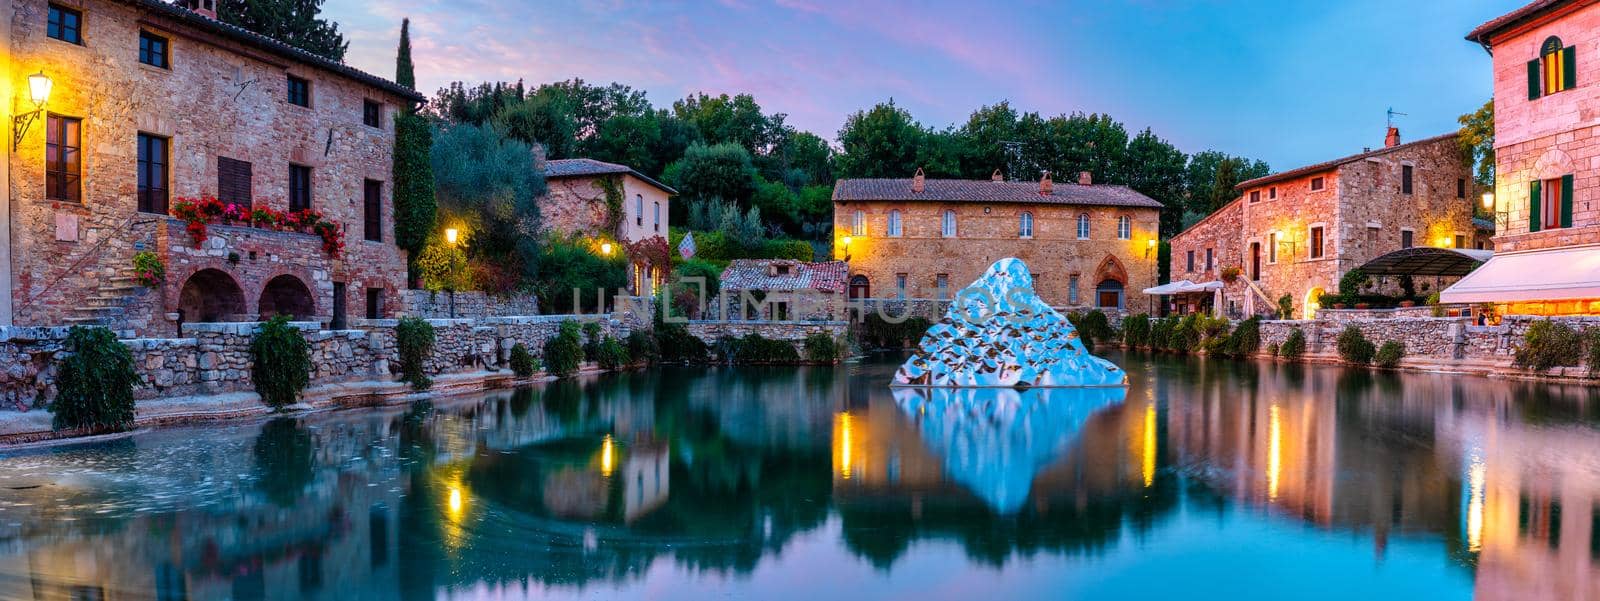 Thermal bath town of Bagno Vignoni, Italy during sunrise. Old thermal baths in the medieval village Bagno Vignoni, Tuscany, Italy. Medieval thermal baths in village Bagno Vignoni, Tuscany, Italy 